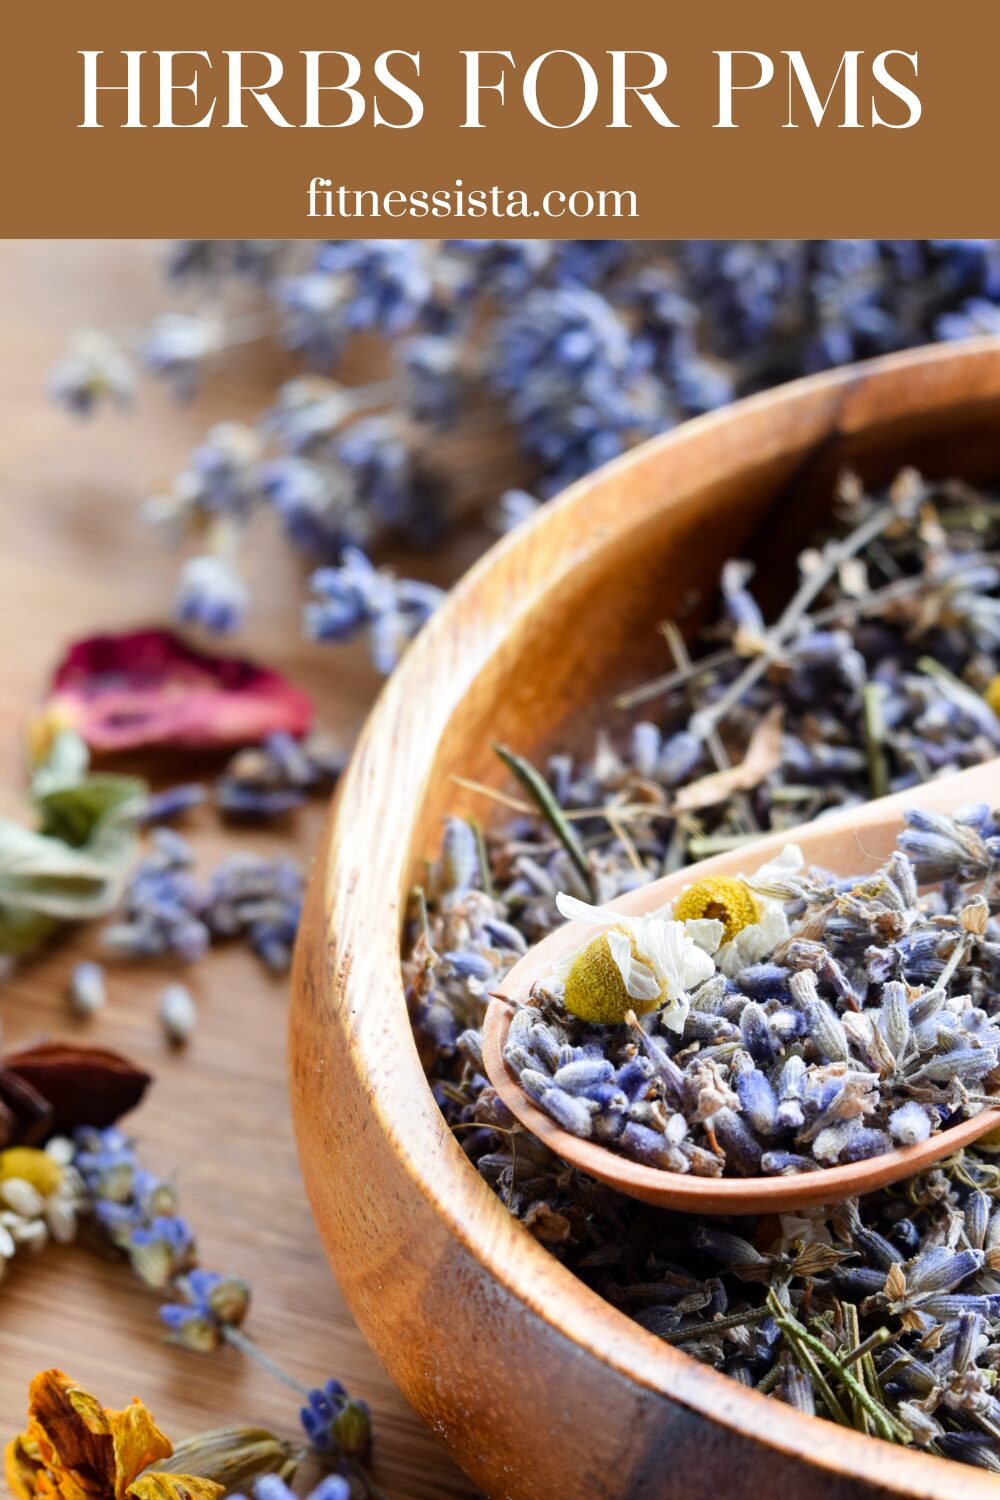 Photo of the most effective herbs for PMS